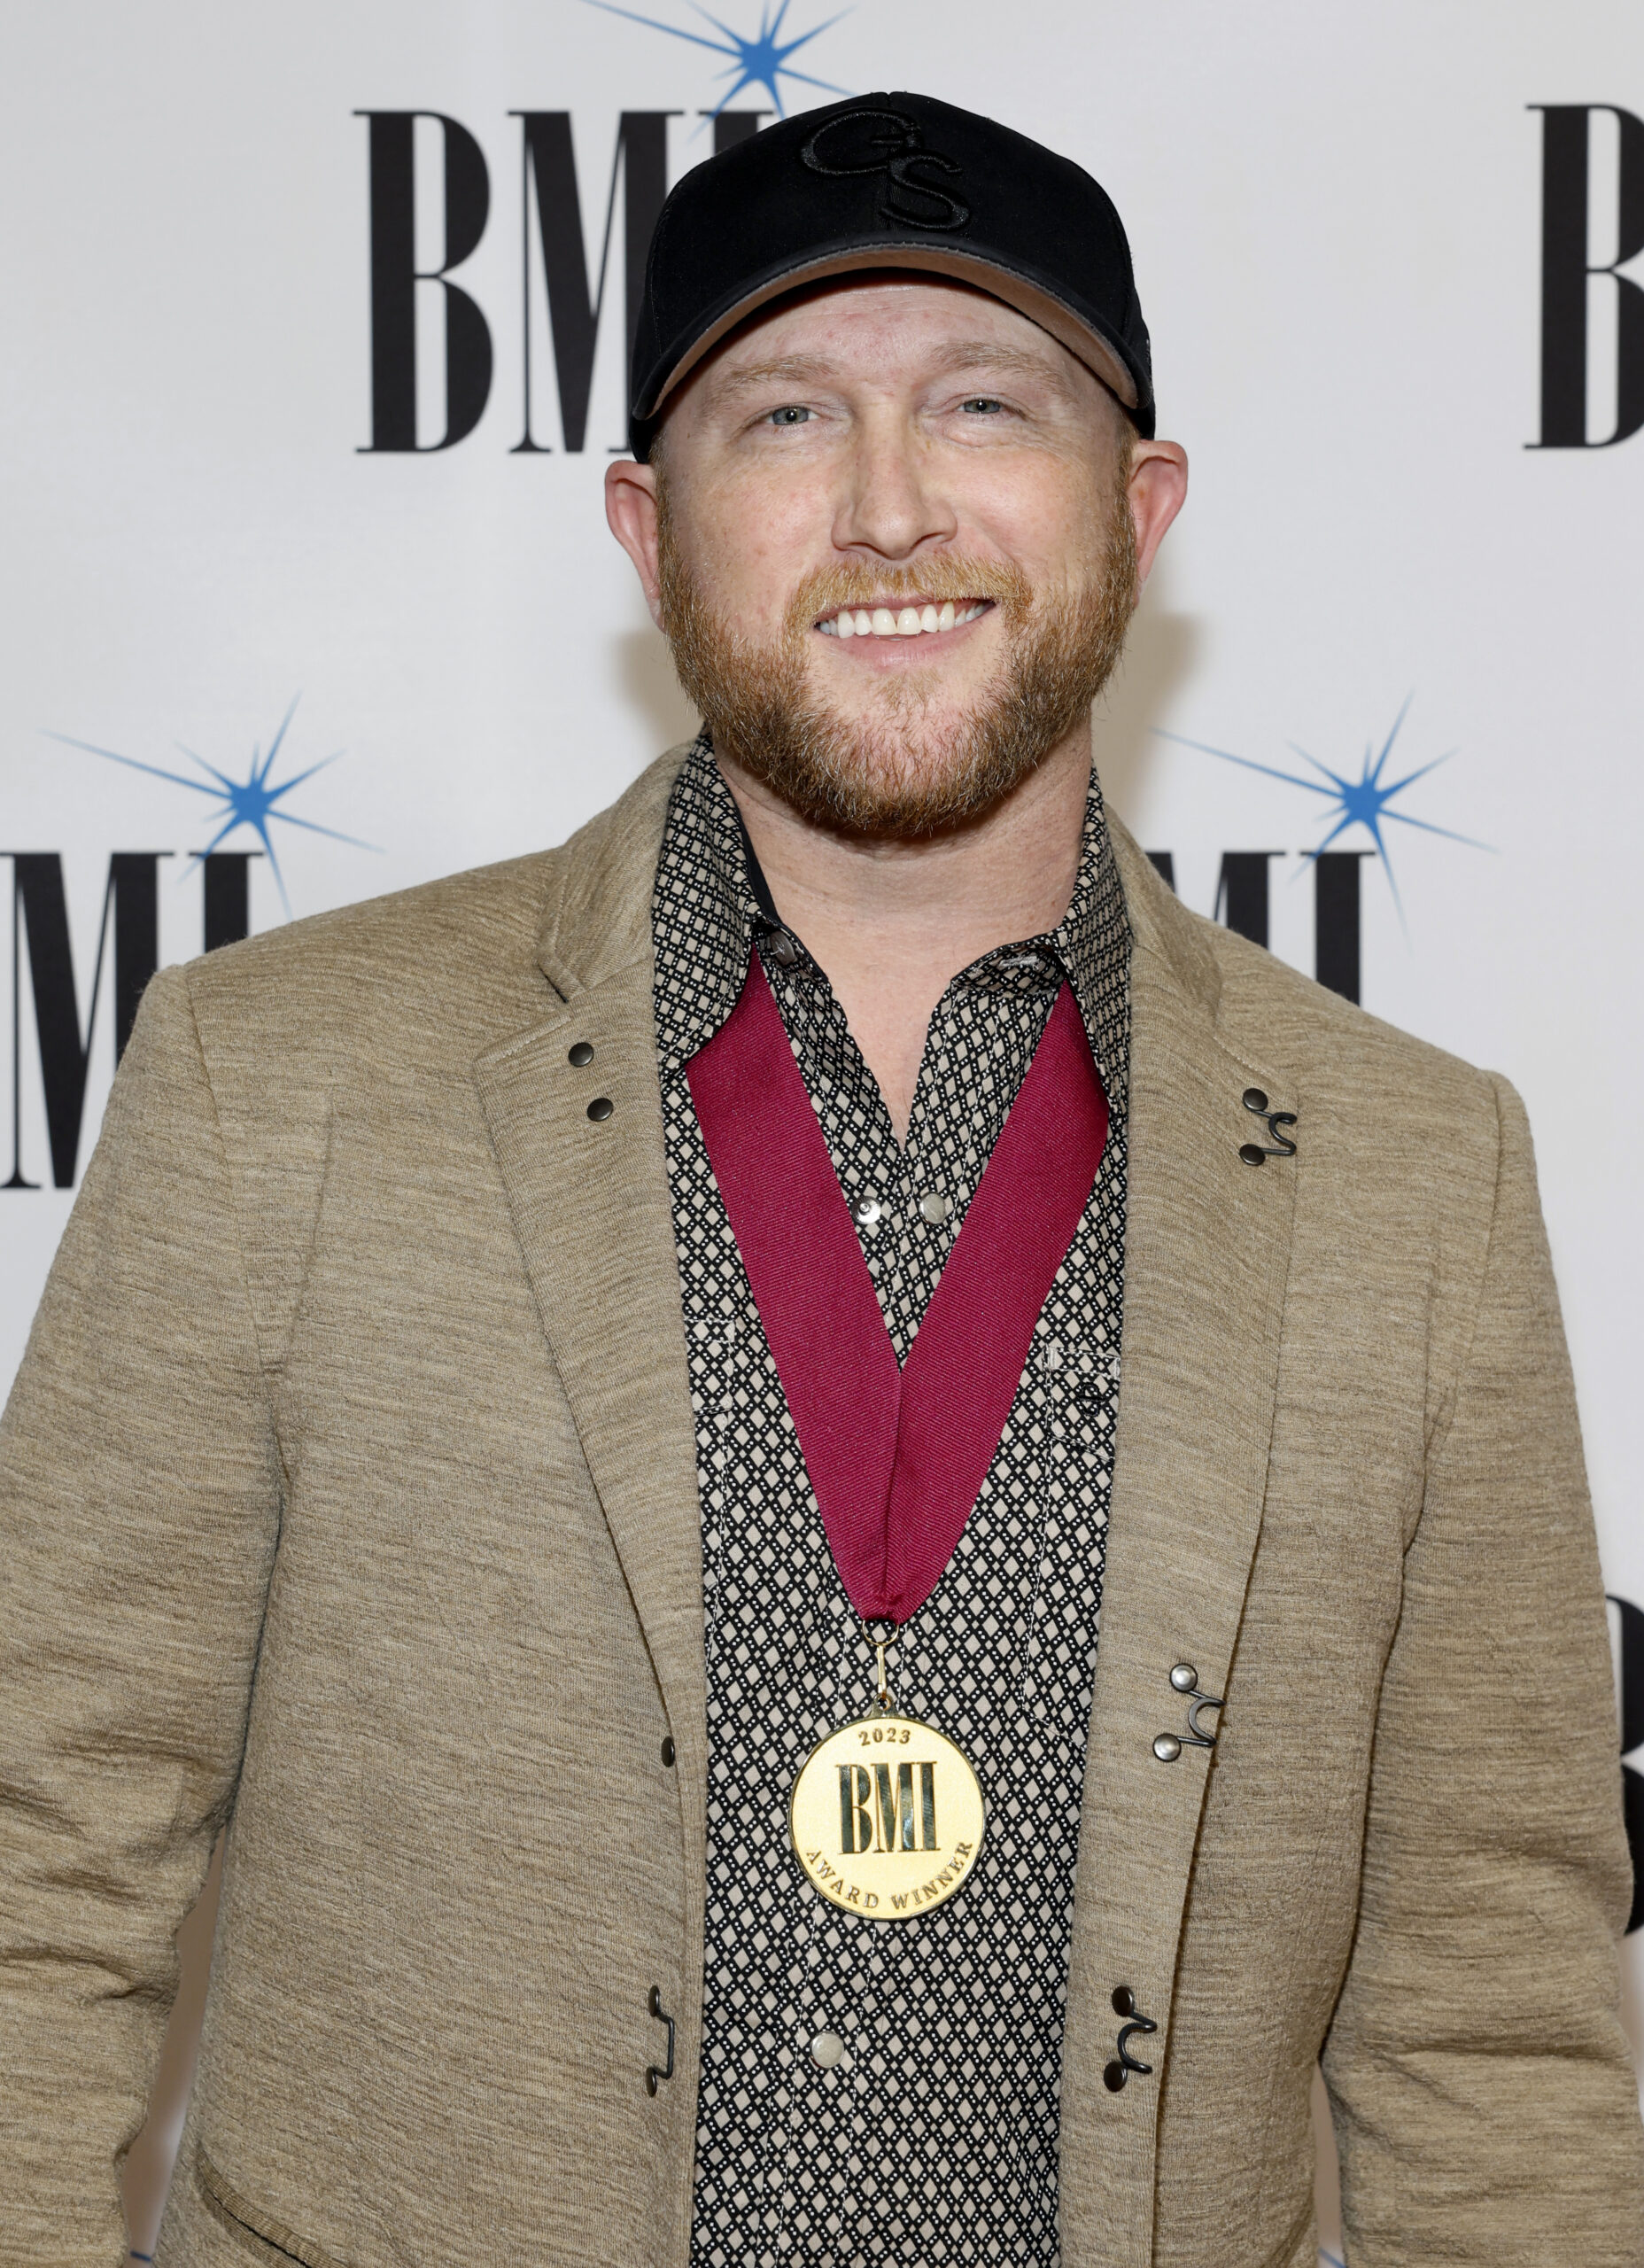 New Music Friday: Cole Swindell Confronts Emotional Past In New Single “3 Feel Tall”